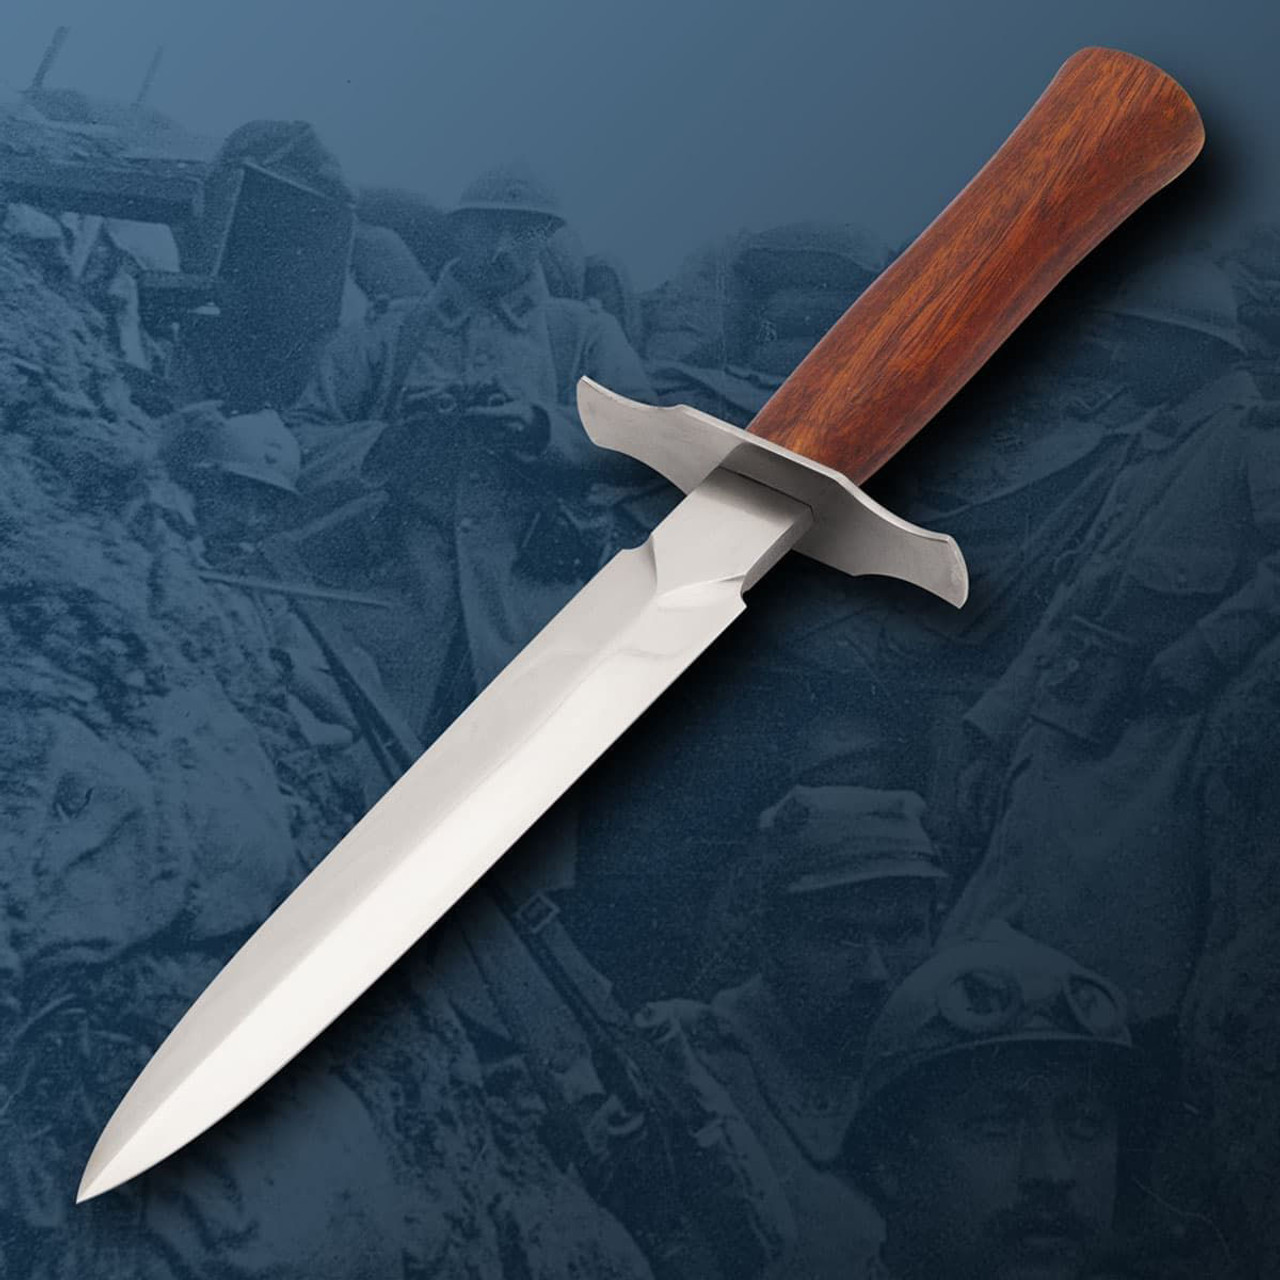 https://cdn11.bigcommerce.com/s-fy9rv139a5/images/stencil/1280x1280/products/10236/23452/0014541_wwi-m1916-avenger-french-fighting-knife__56530.1702987899.jpg?c=1